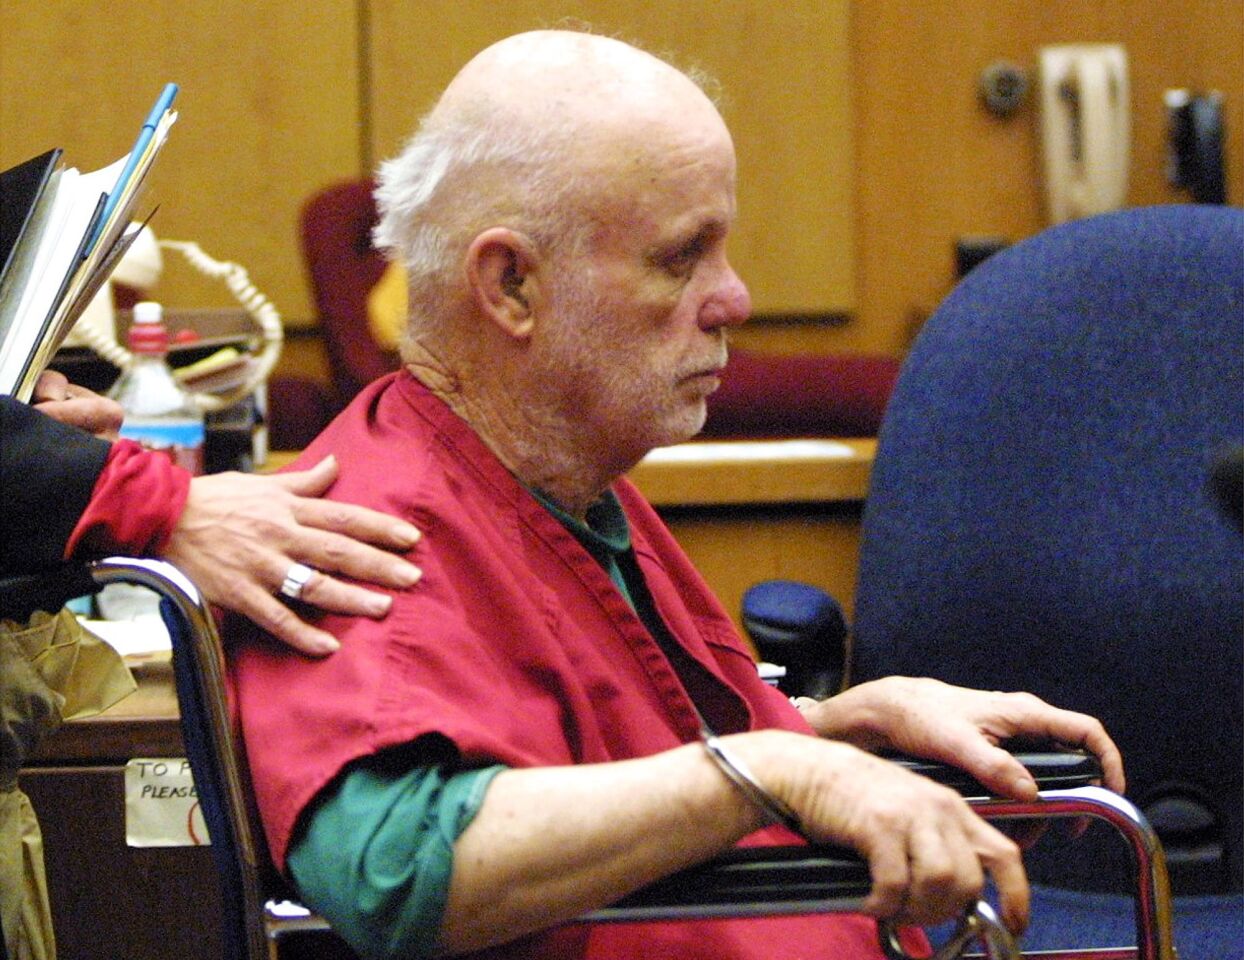 Convicted kidnapper Kenneth Eugene Parnell during a court appearance in Oakland in 2003. Parnell was convicted in the kidnappings of Steven Stayner in 1972 and Timothy White in 1980.